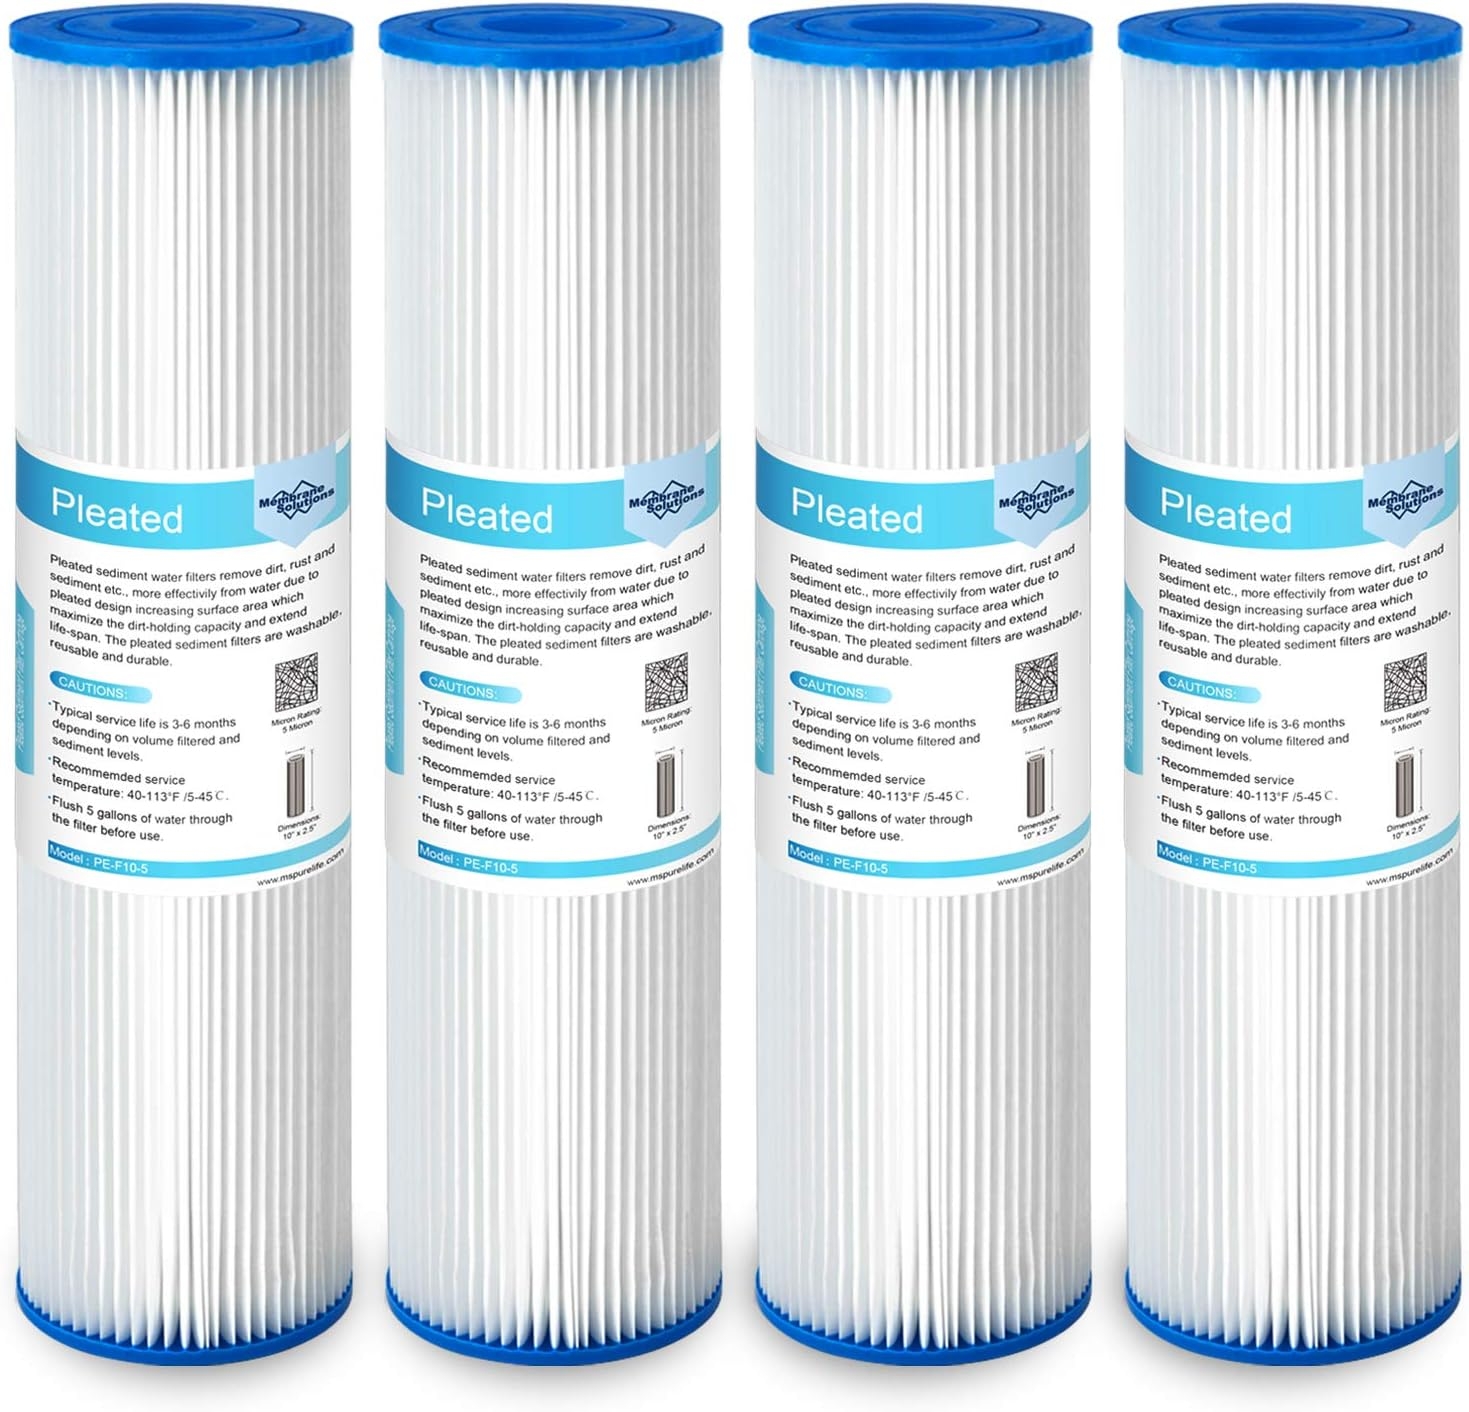 Membrane Solutions 5 Micron Pleated Polyester Sediment Water Filter 10"x2.5" Replacement Cartridge Universal Whole House Pre-Filter Compatible with W50PE, WFPFC3002, SPC-25-1050, FM-50-975 - 4 Pack